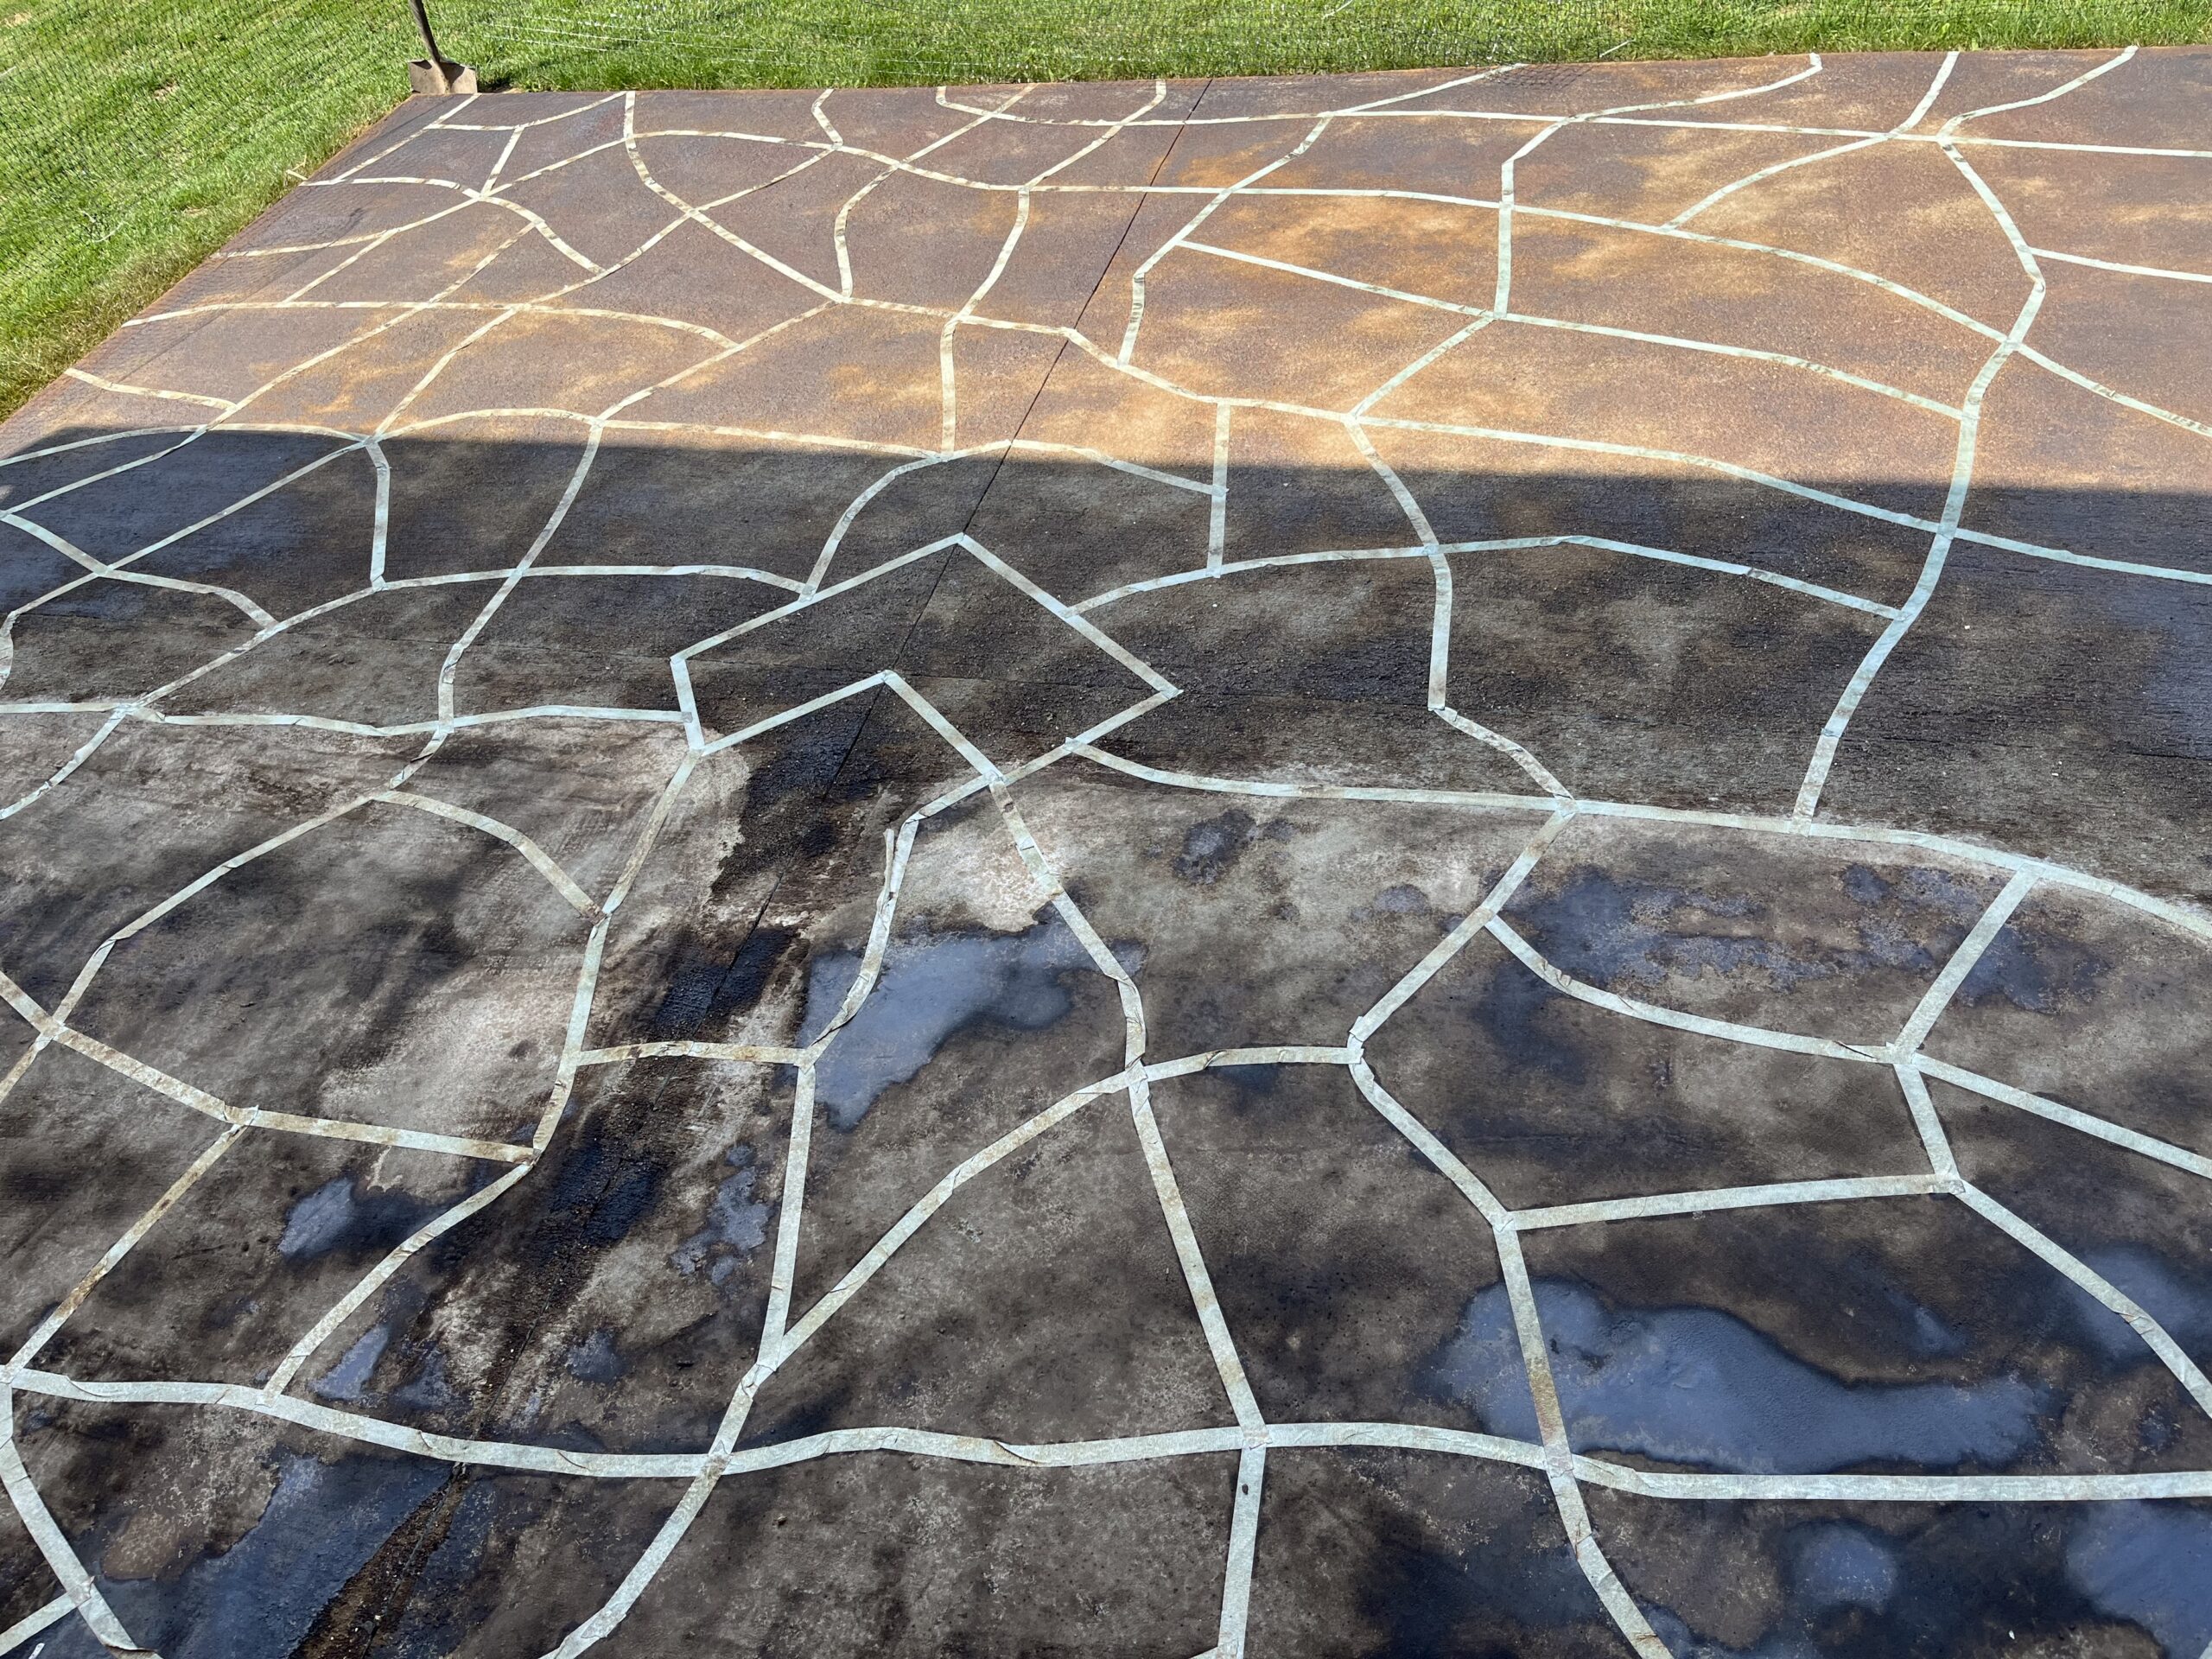 The patio surface showing a deepened color, 6 hours after black EverStain acid stain application